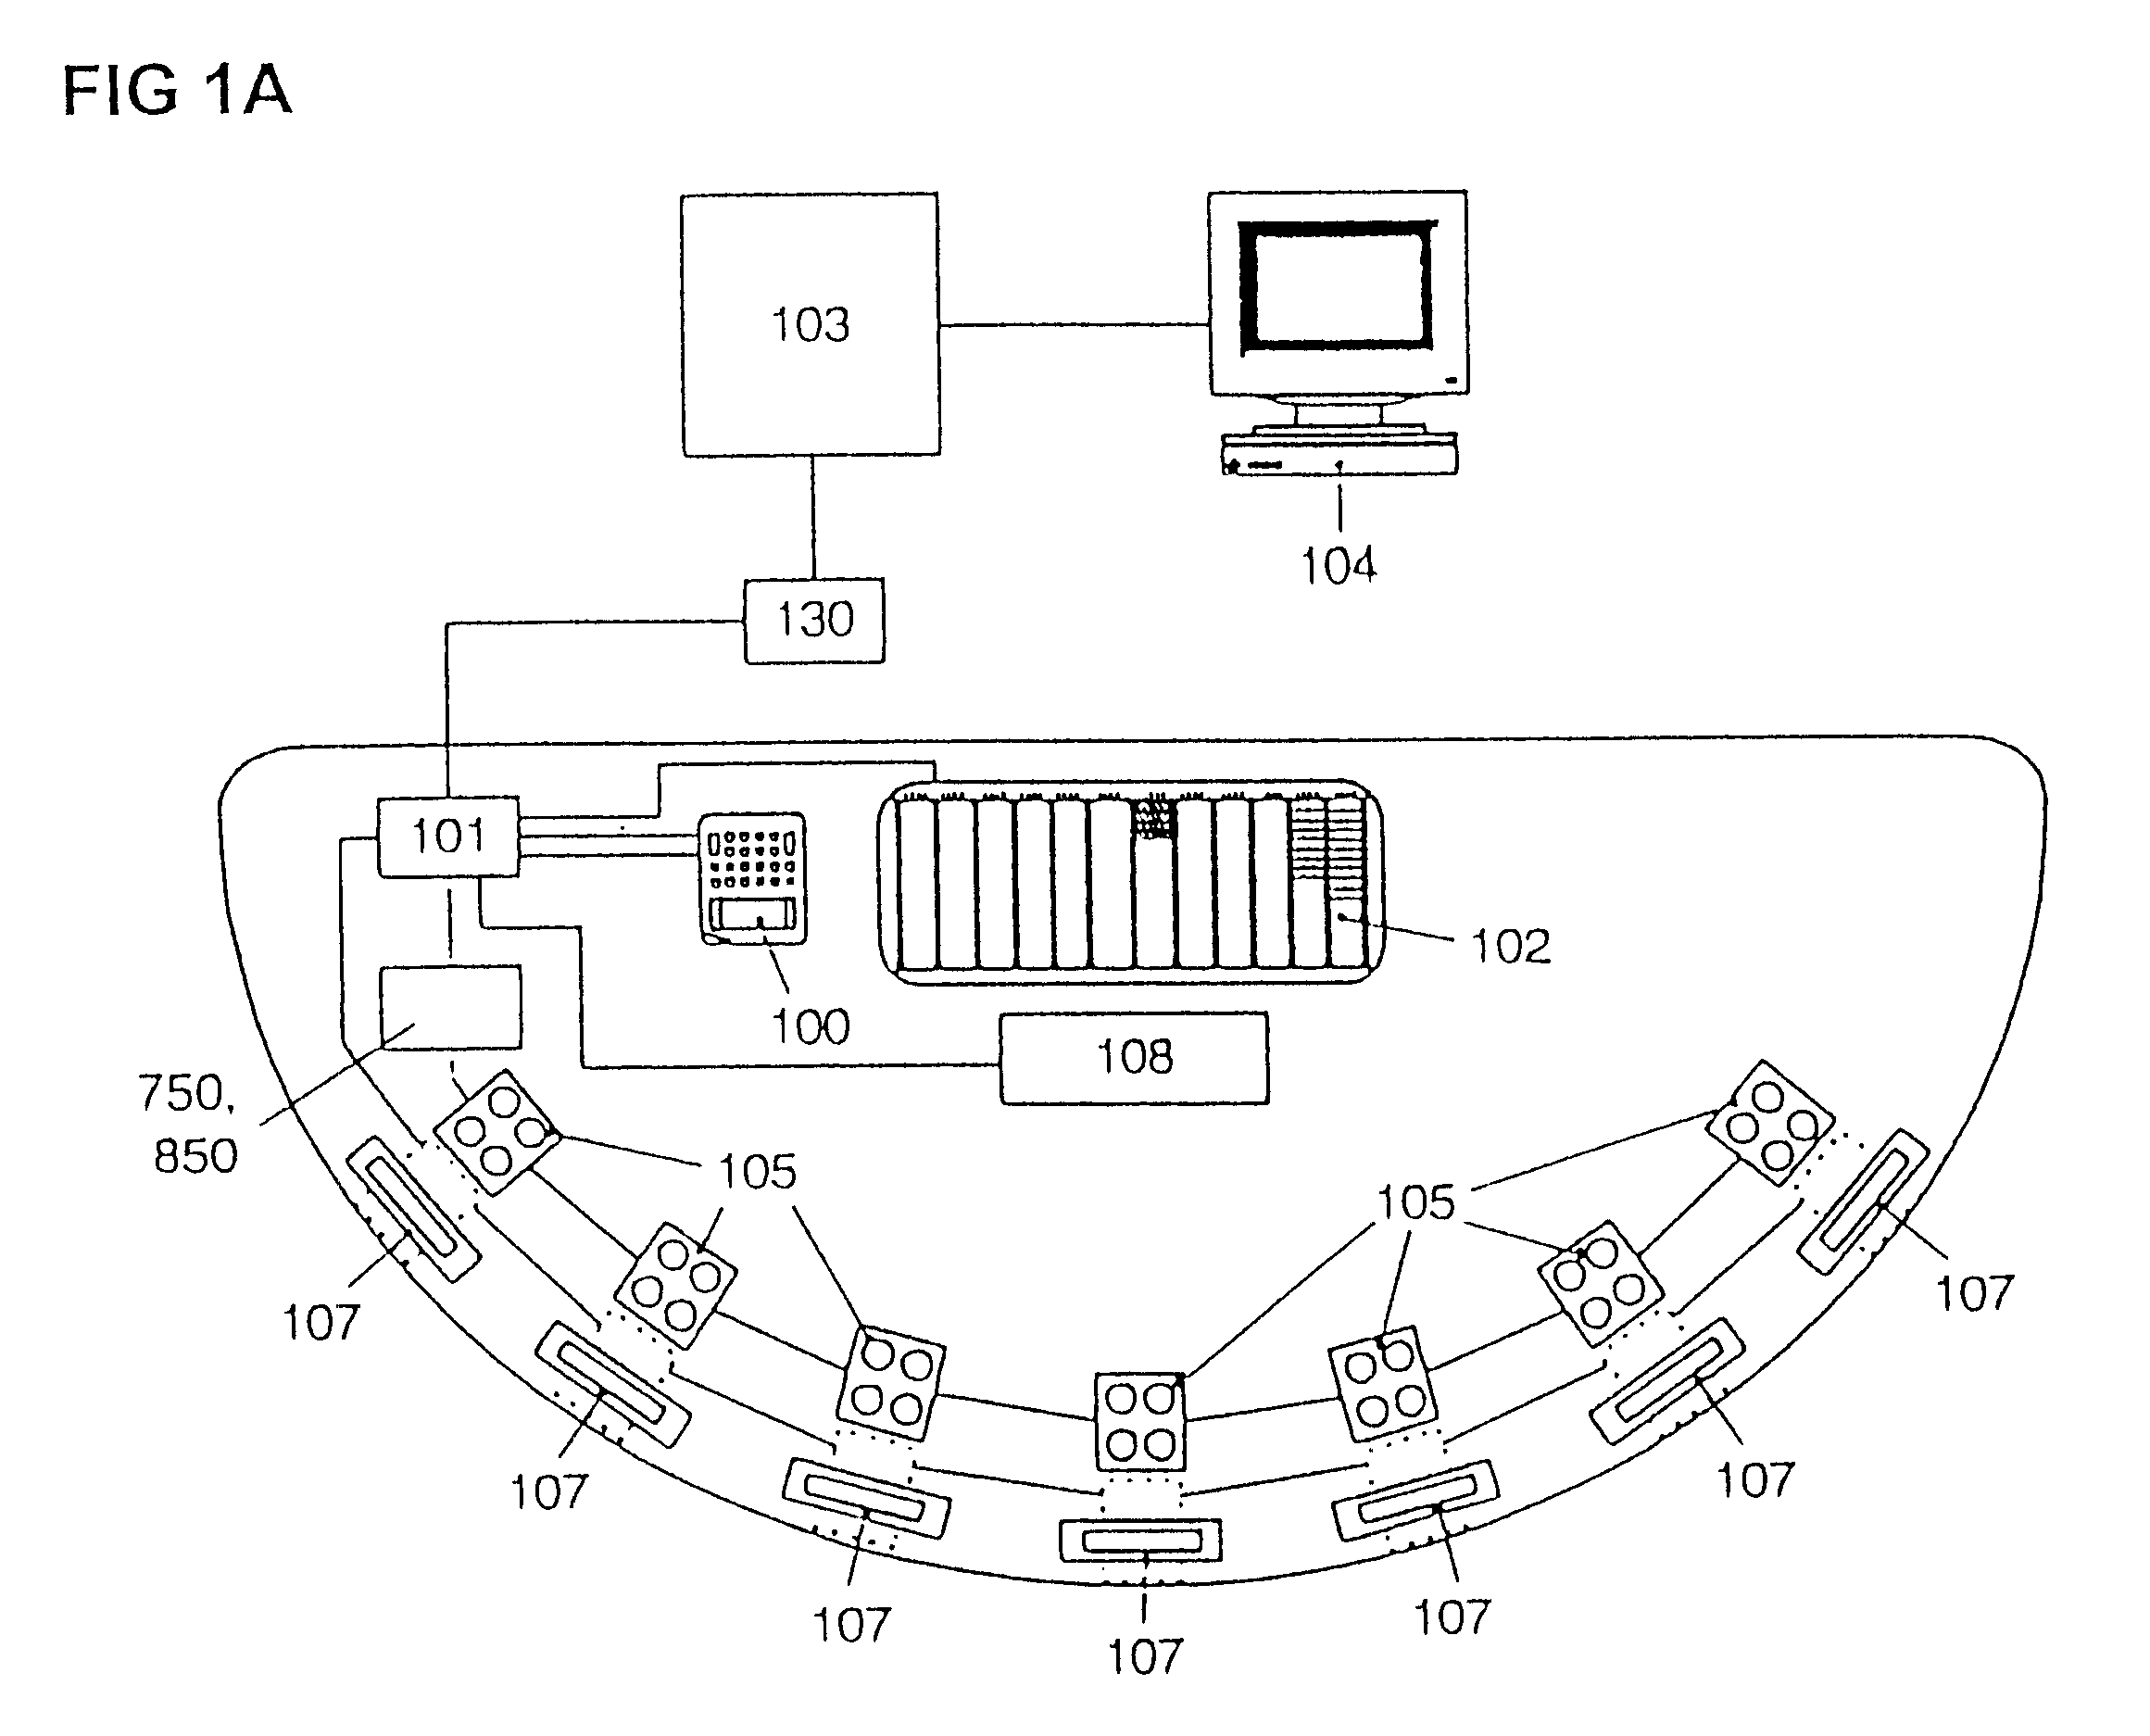 Apparatus and method for data gathering in games of chance